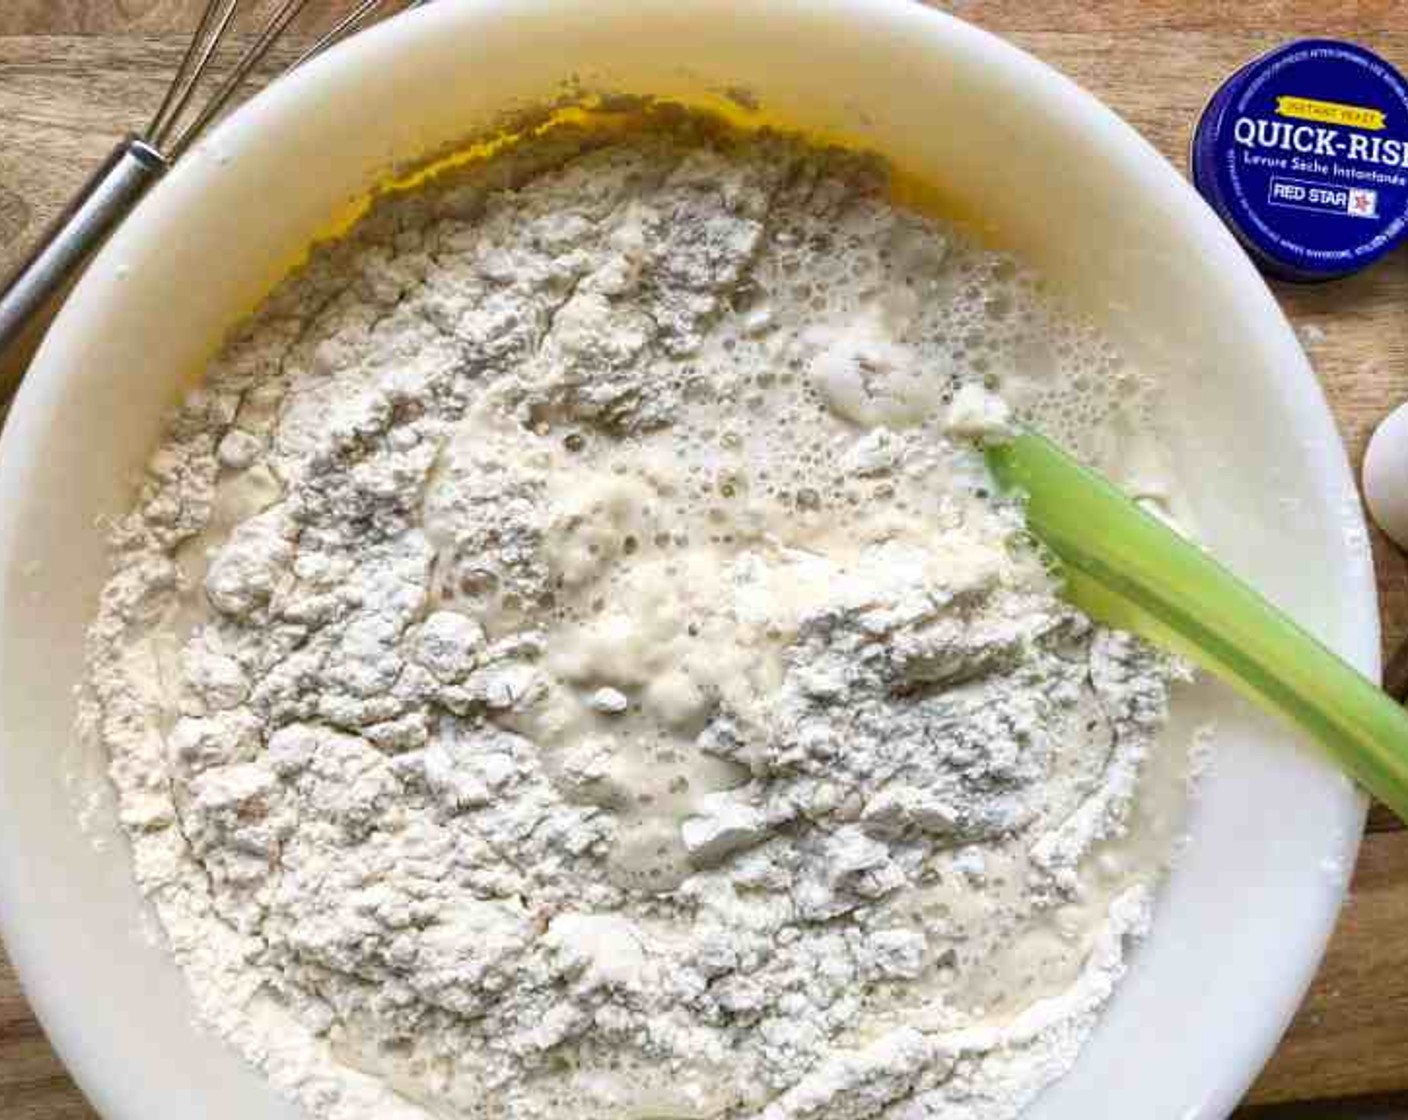 step 1 To make the dough, in a large bowl, whisk together the Unbleached All Purpose Flour (4 cups), Kosher Salt (1/2 Tbsp), and Instant Dry Yeast (1 tsp). Add the Water (2 cups). Using a rubber spatula, mix until the liquid is absorbed and the ingredients form a sticky dough ball.